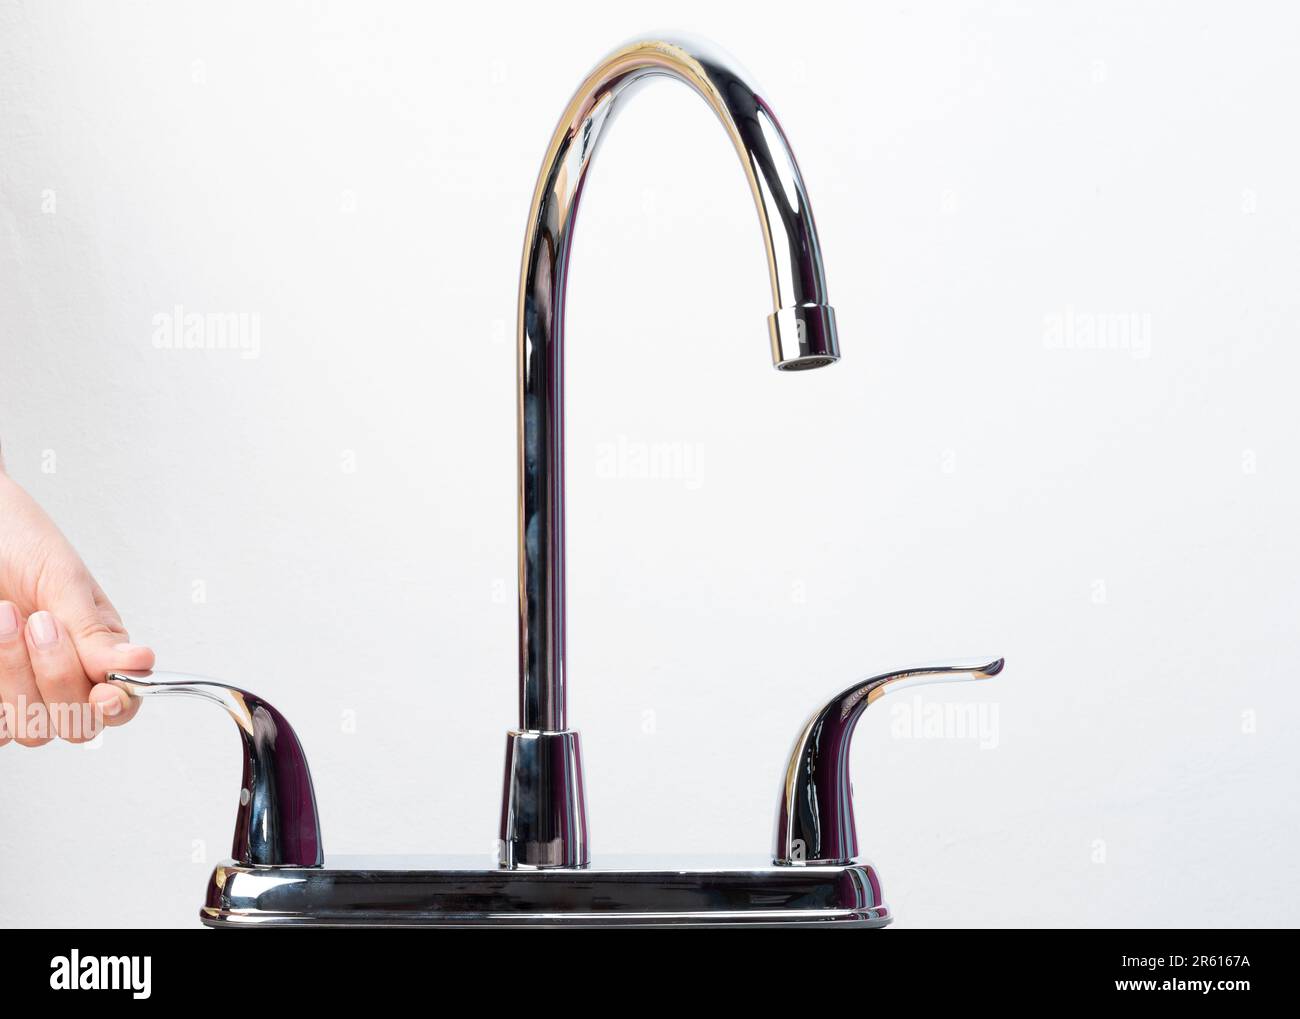 Save water resources theme. Stainless mixer faucet  on white isolated background Stock Photo